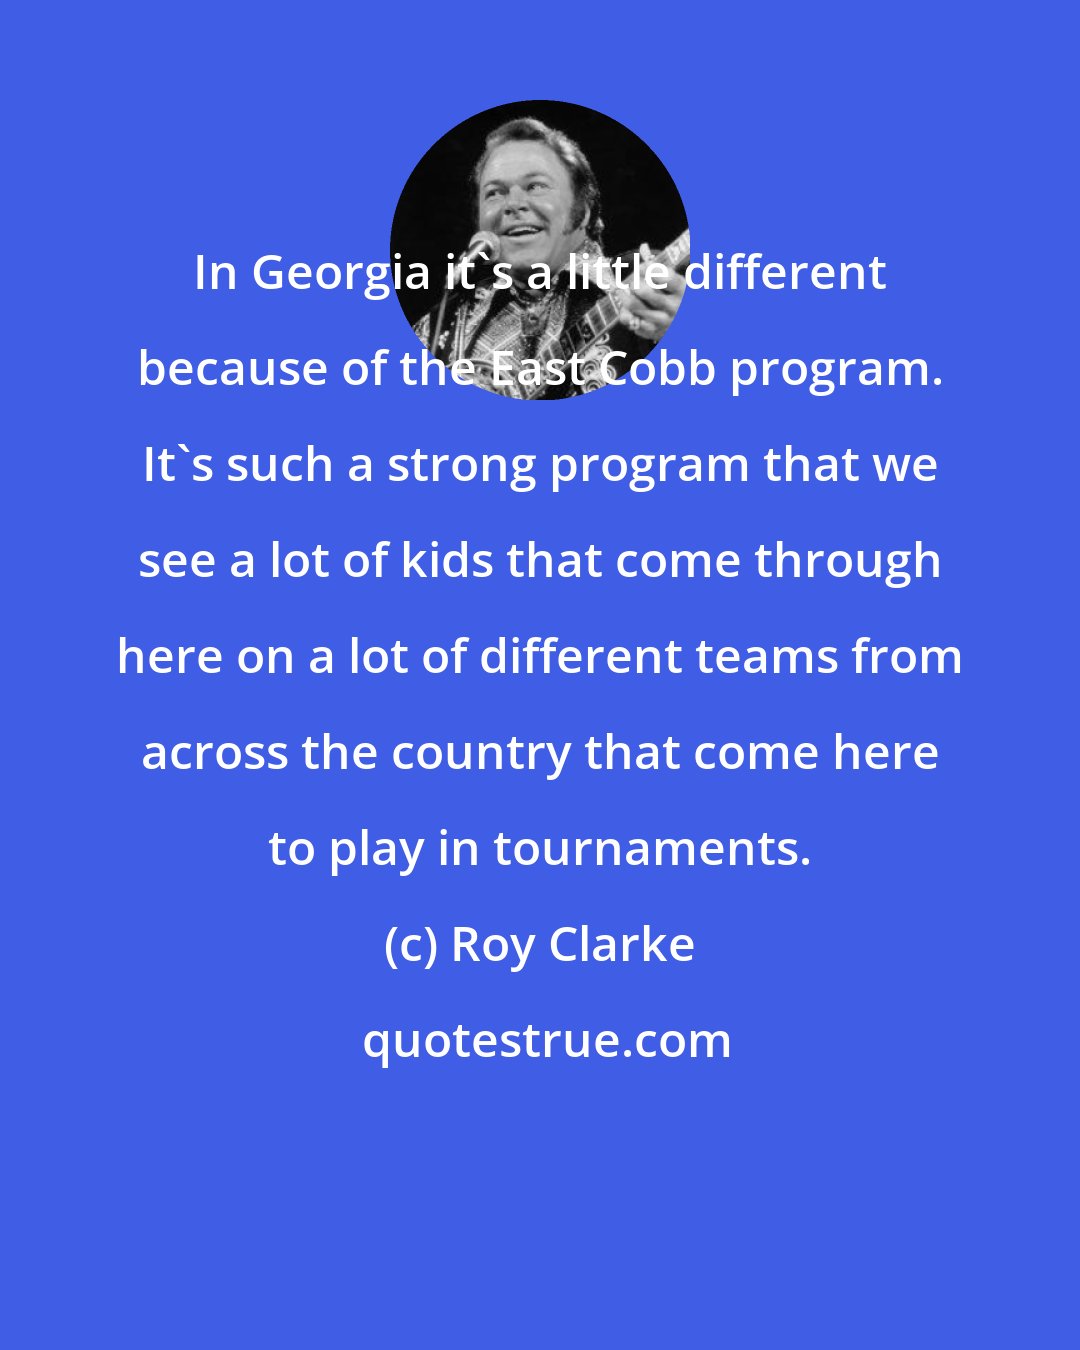 Roy Clarke: In Georgia it's a little different because of the East Cobb program. It's such a strong program that we see a lot of kids that come through here on a lot of different teams from across the country that come here to play in tournaments.